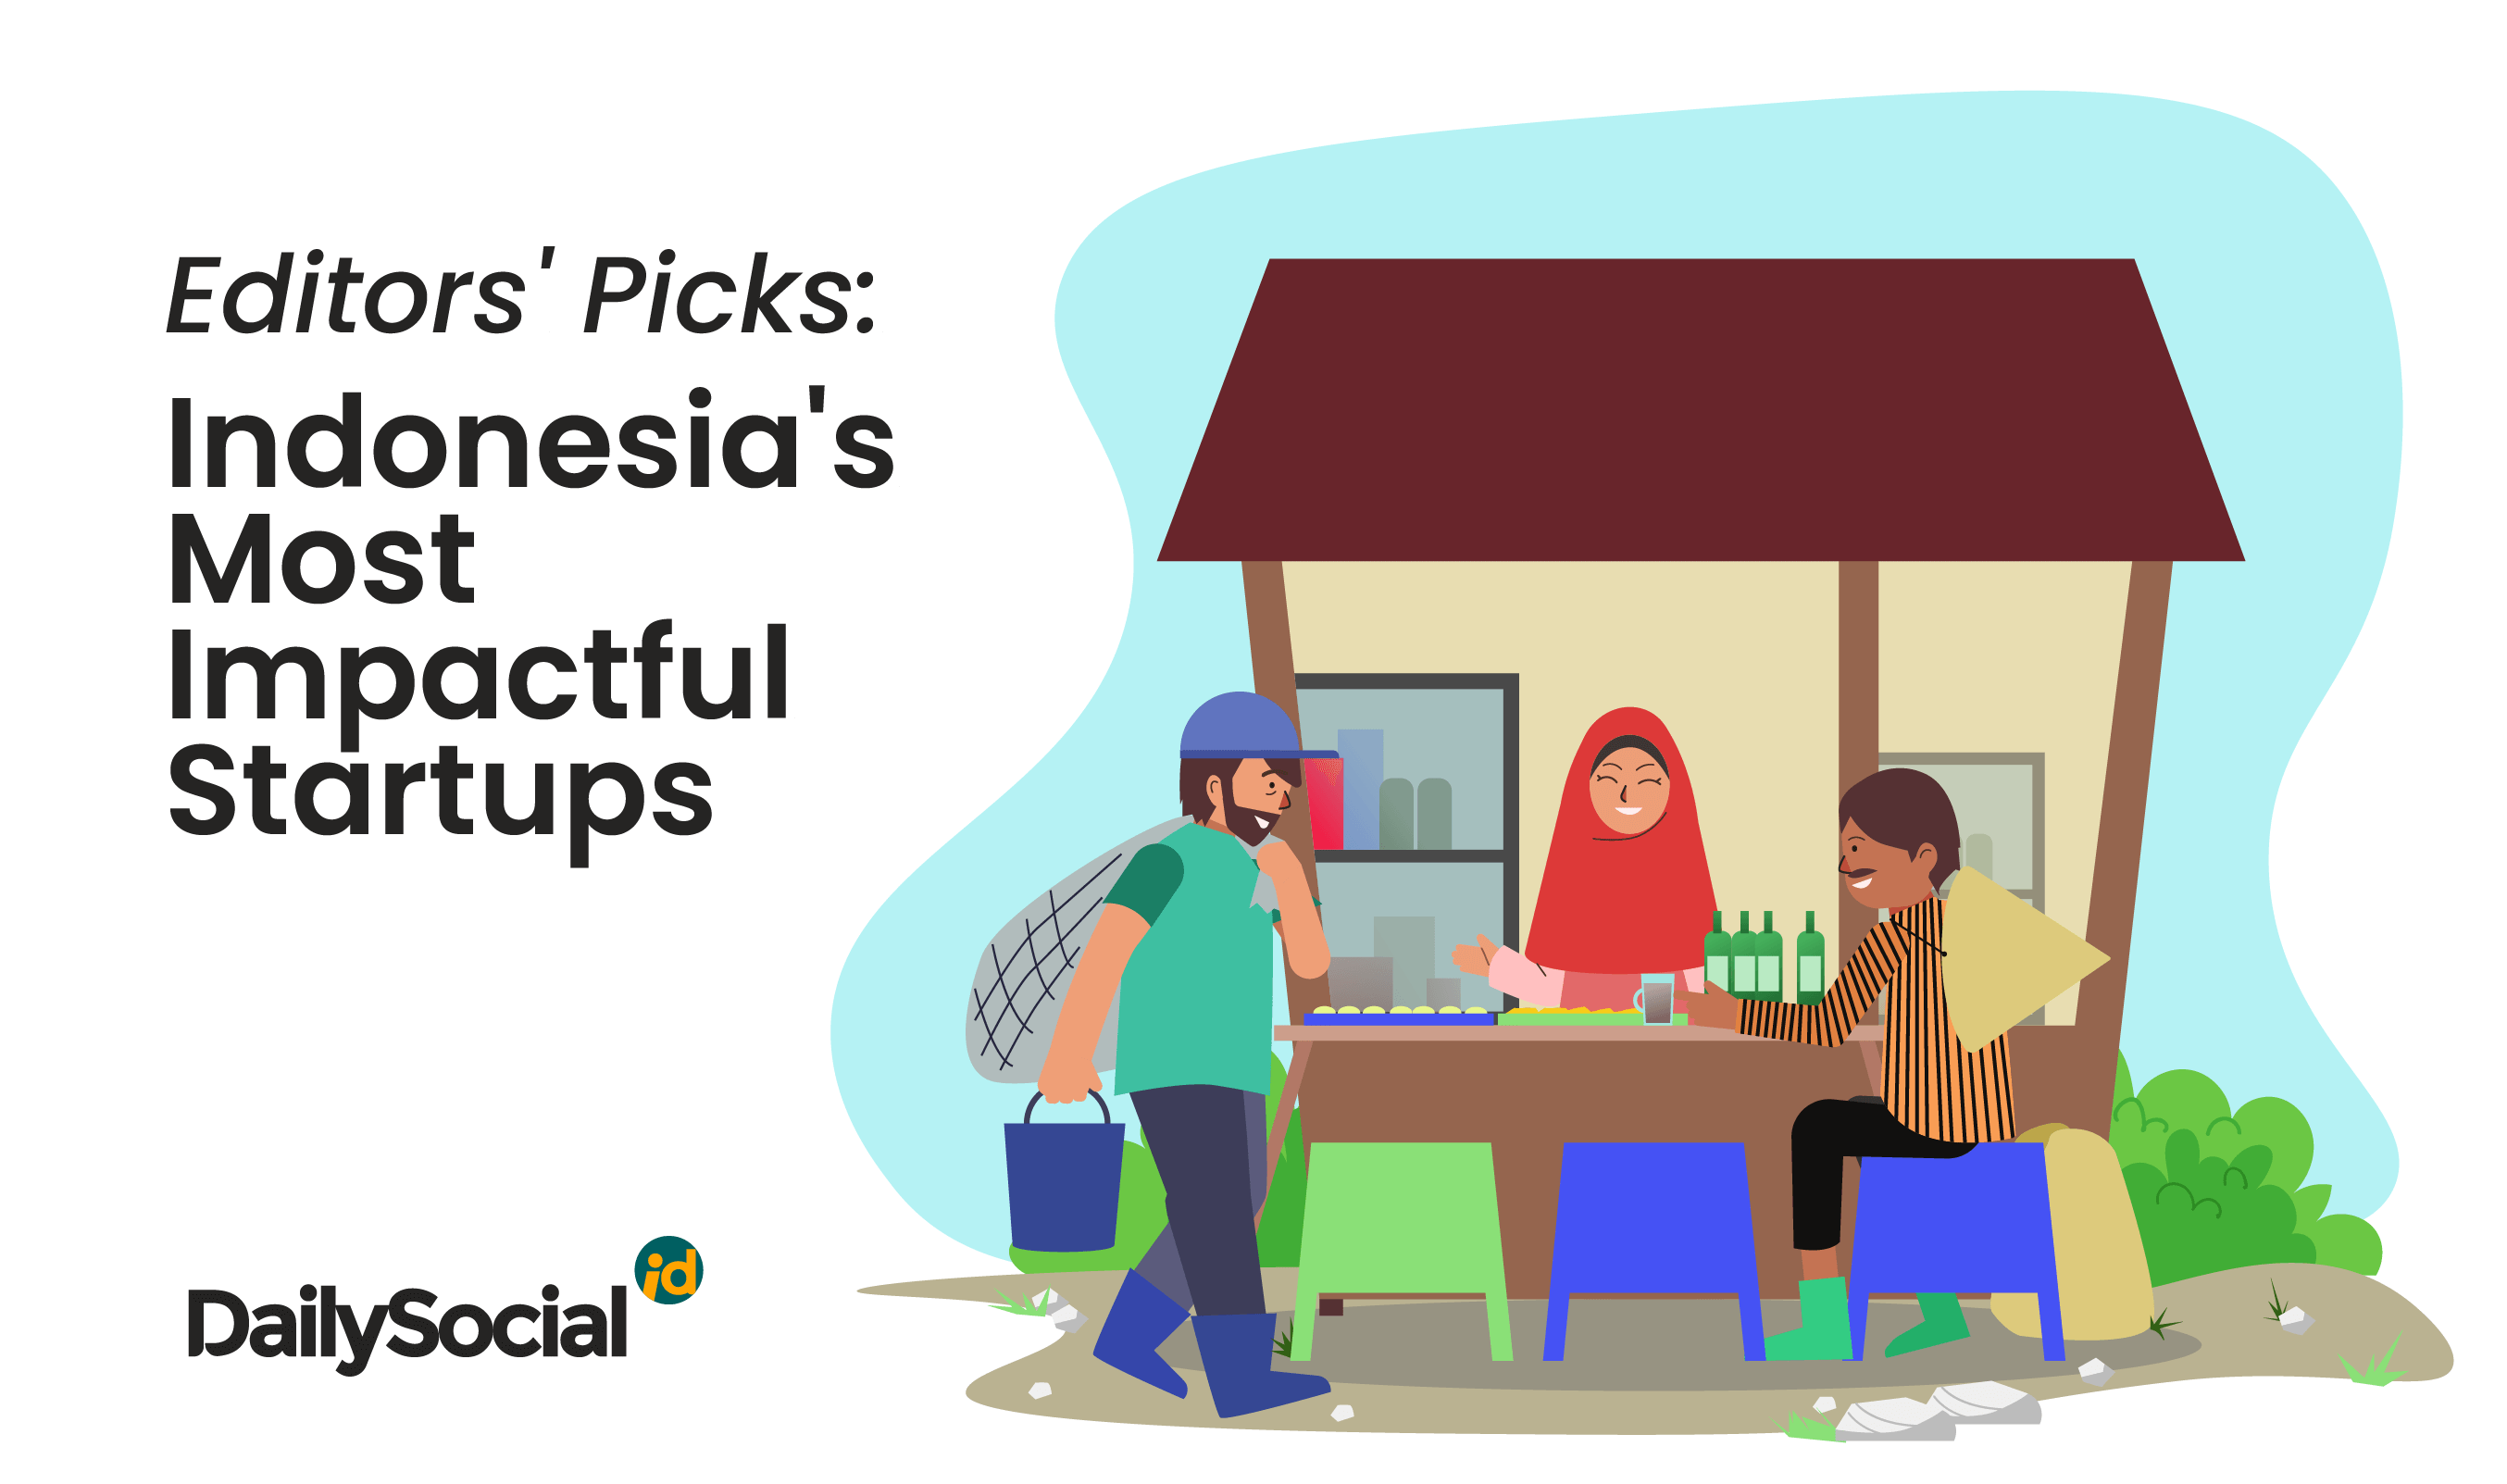 Here are our picks (handpicked by our own editors) for Indonesia's most impactful startups that help bring positive changes to grassroots communities